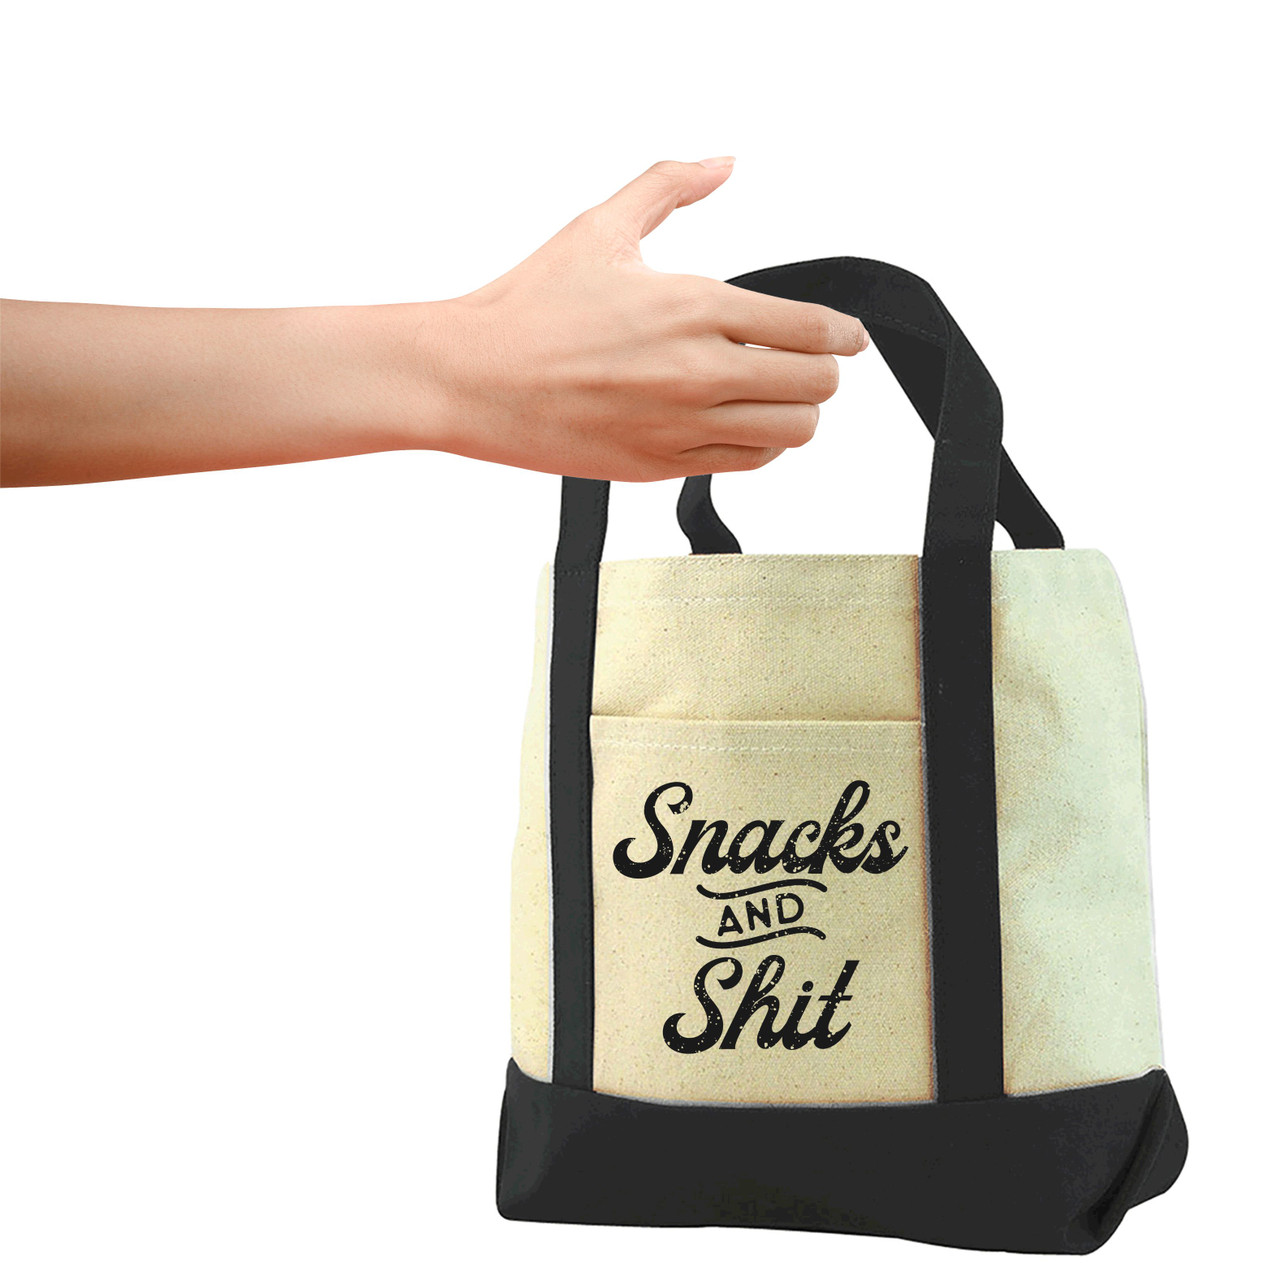 Snacks and Shit - Small Canvas Tote Bag